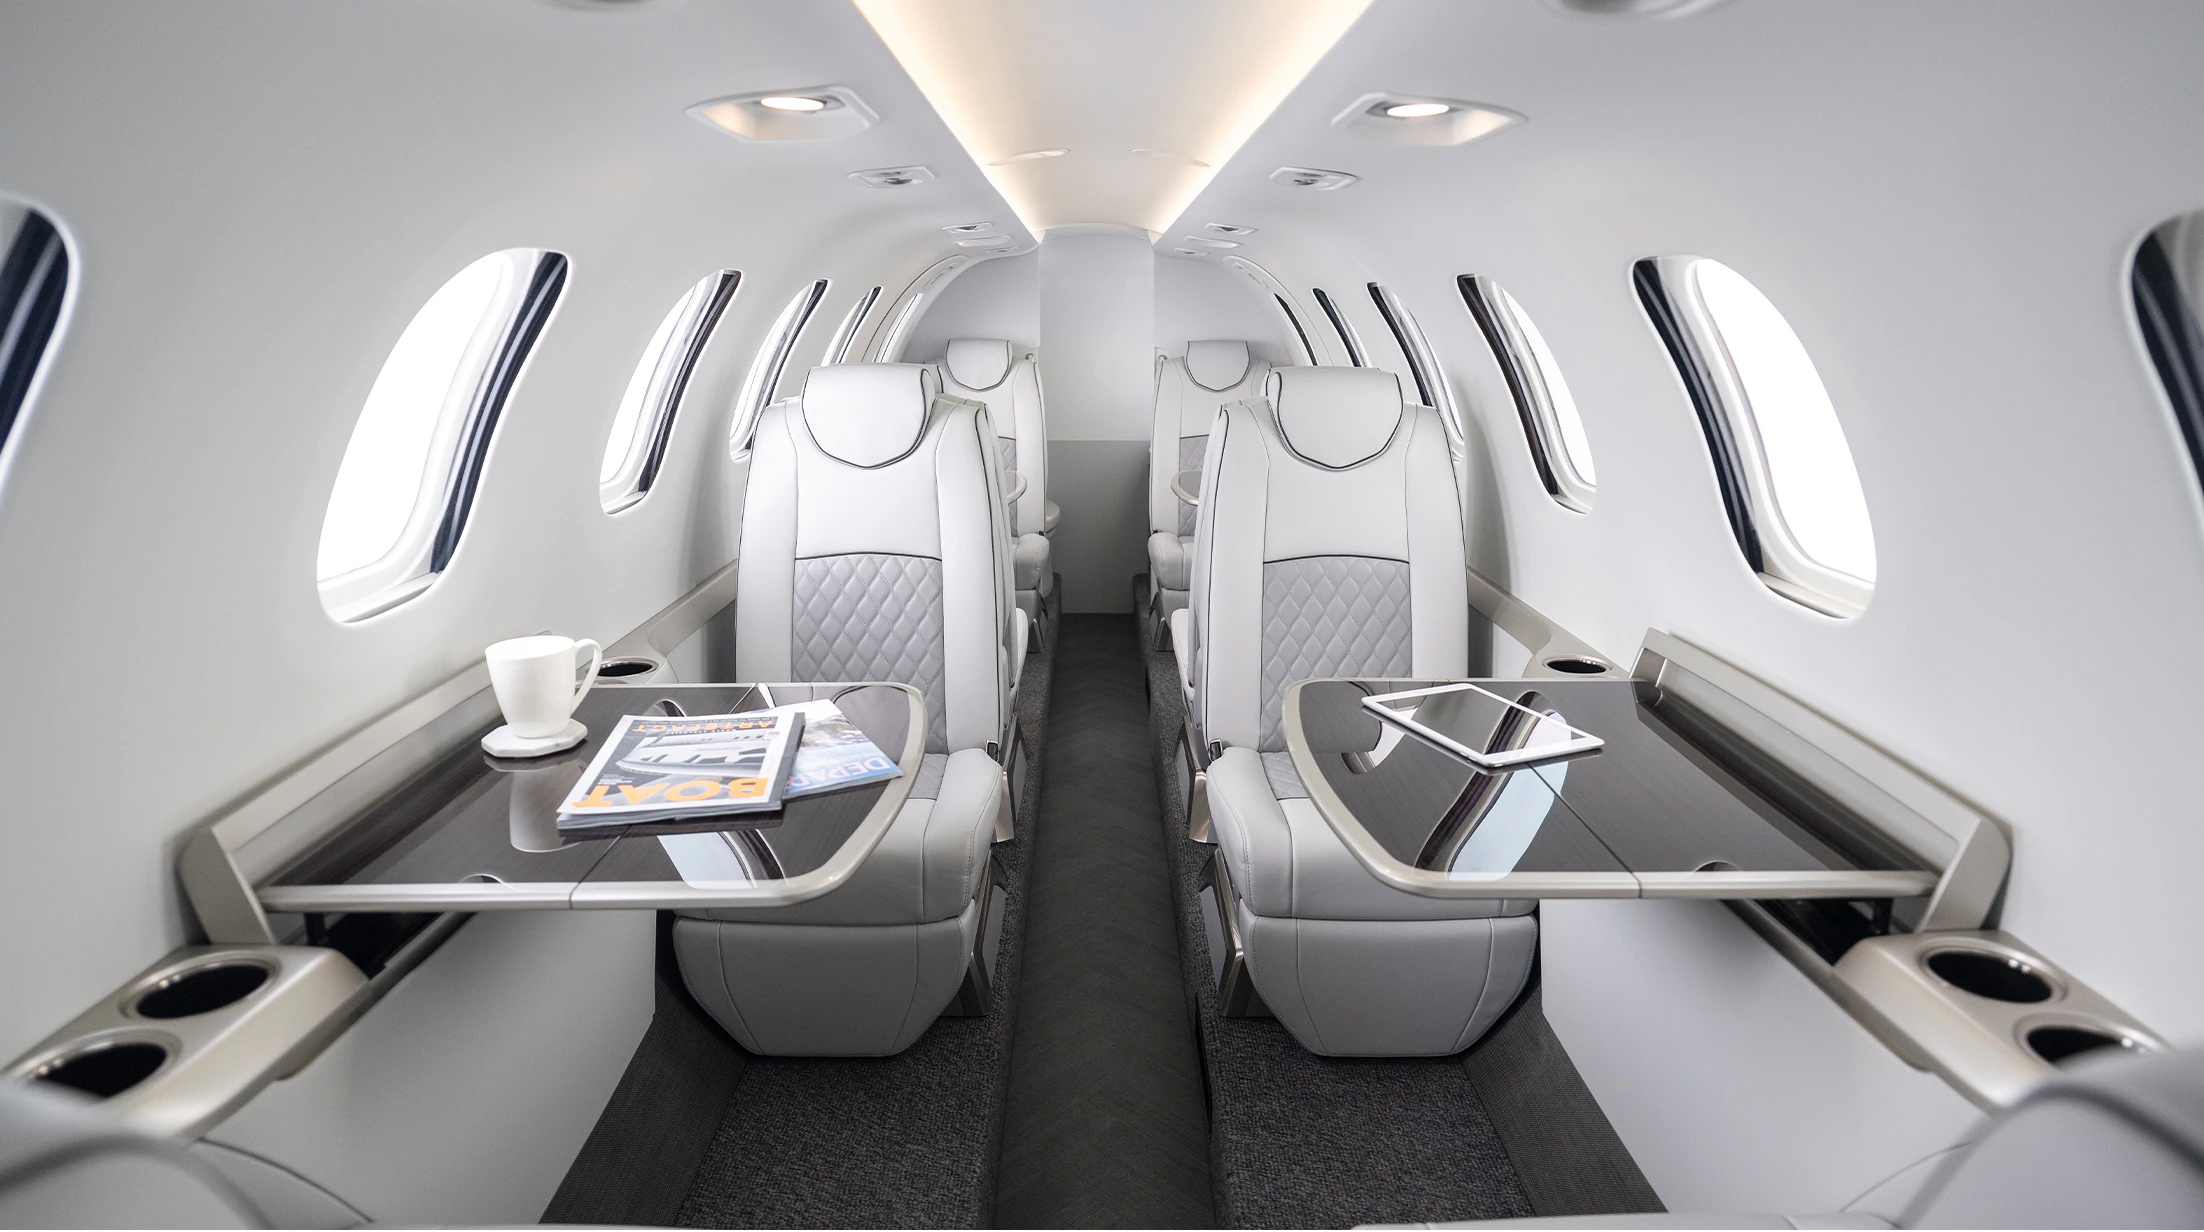 FLY 7 on X: Check out our empty leg opportunities with the